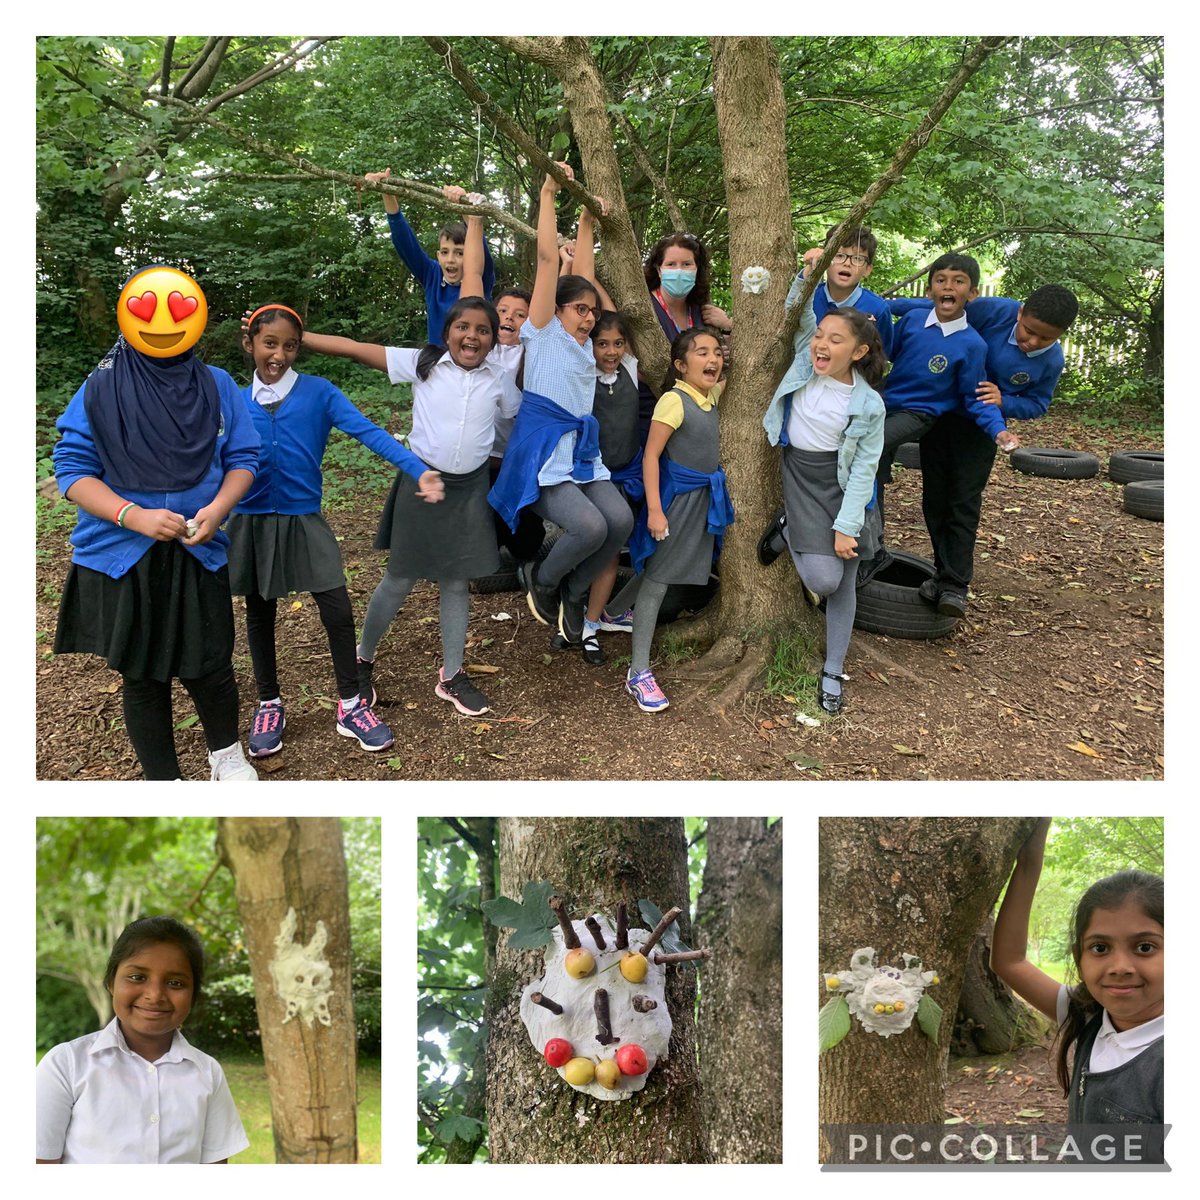 Another session of creating ‘grotesques’ out of clay in our fabulous #OutdoorLearning area. Thinking about the designs found in @stmarysCF10, the children brought their ideas to life with the freedom of nature all around them. Amazing likeness with a few! #EnhancingWellbeing